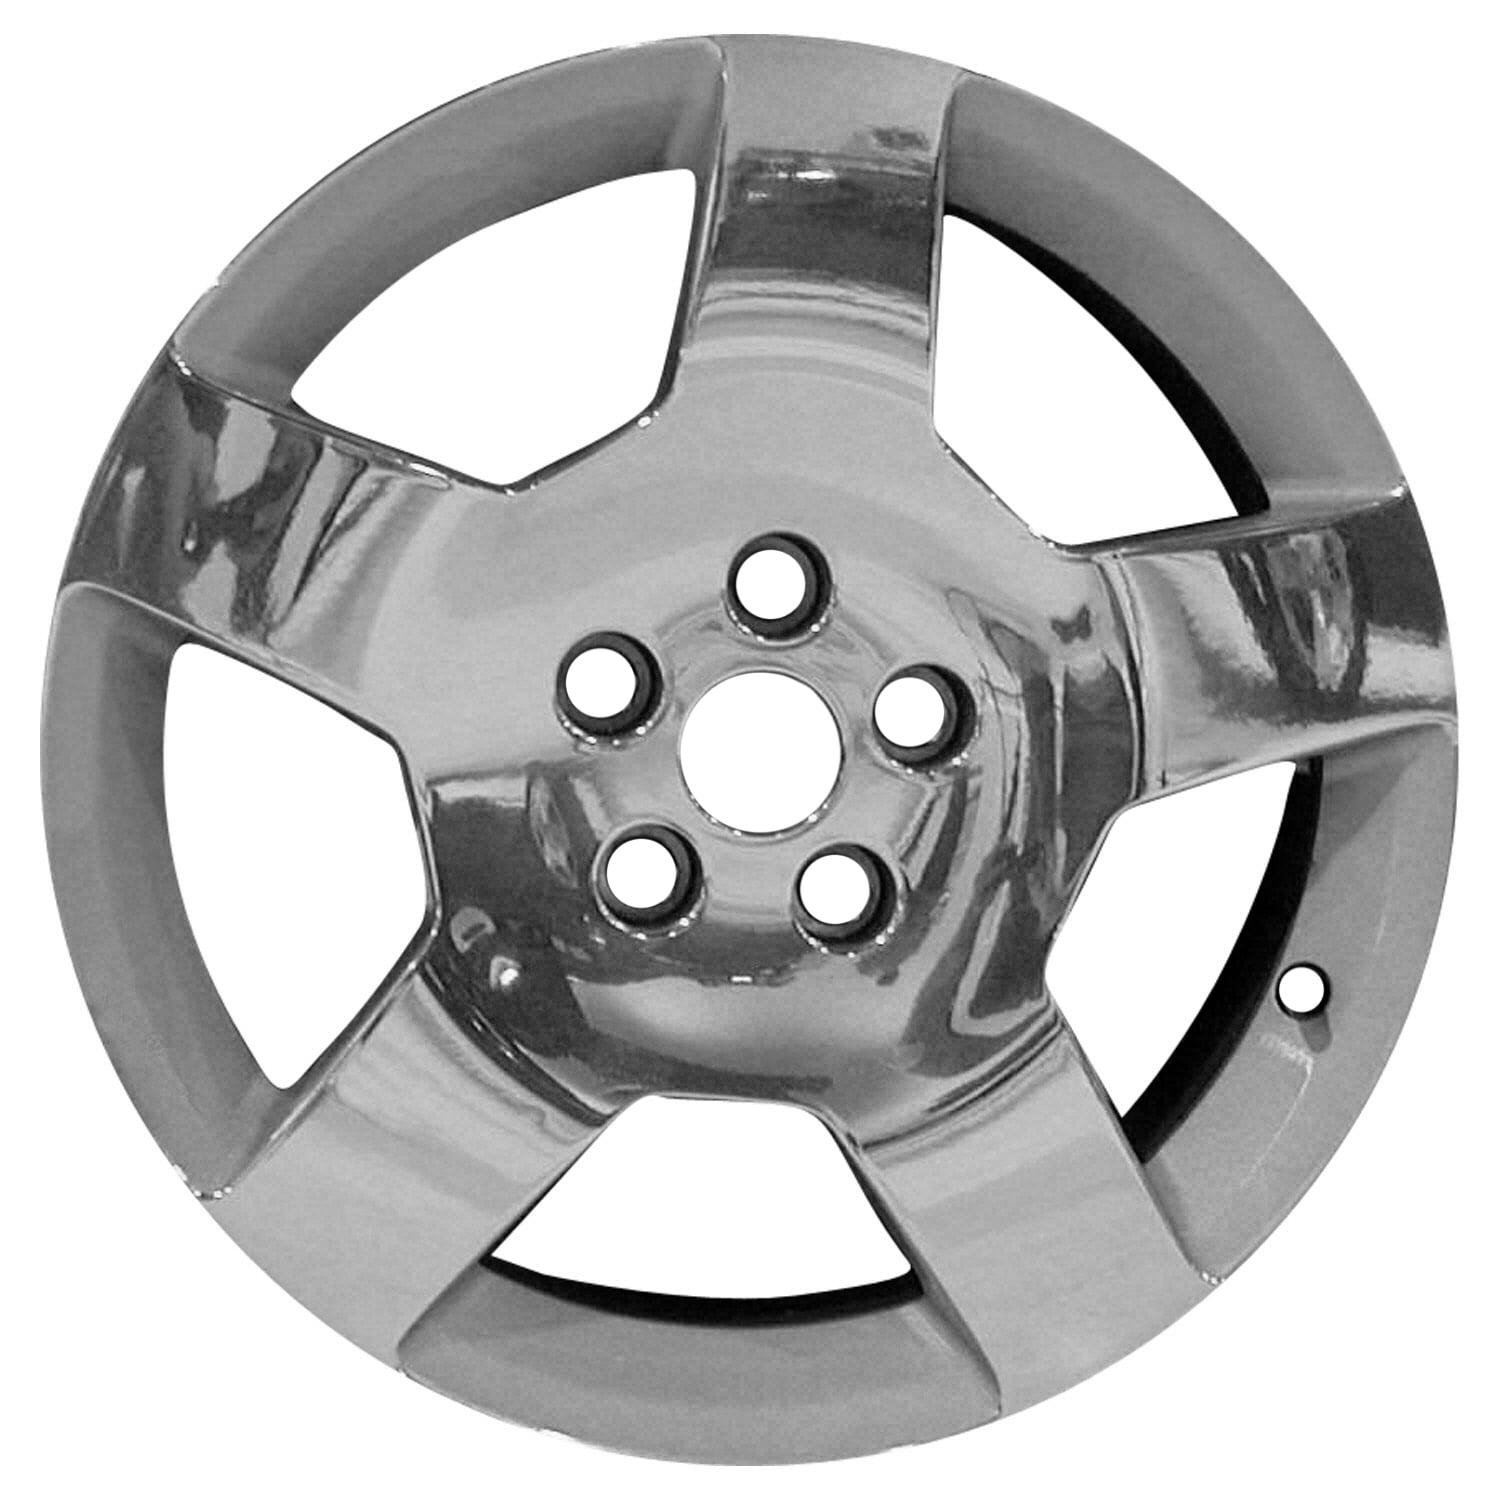 Aftermarket 2005-2010 Chevrolet Cobalt 17x7 Aluminum Alloy Wheel, Rim Polished Full Face - 5215 Tire Size For A 2010 Chevy Cobalt